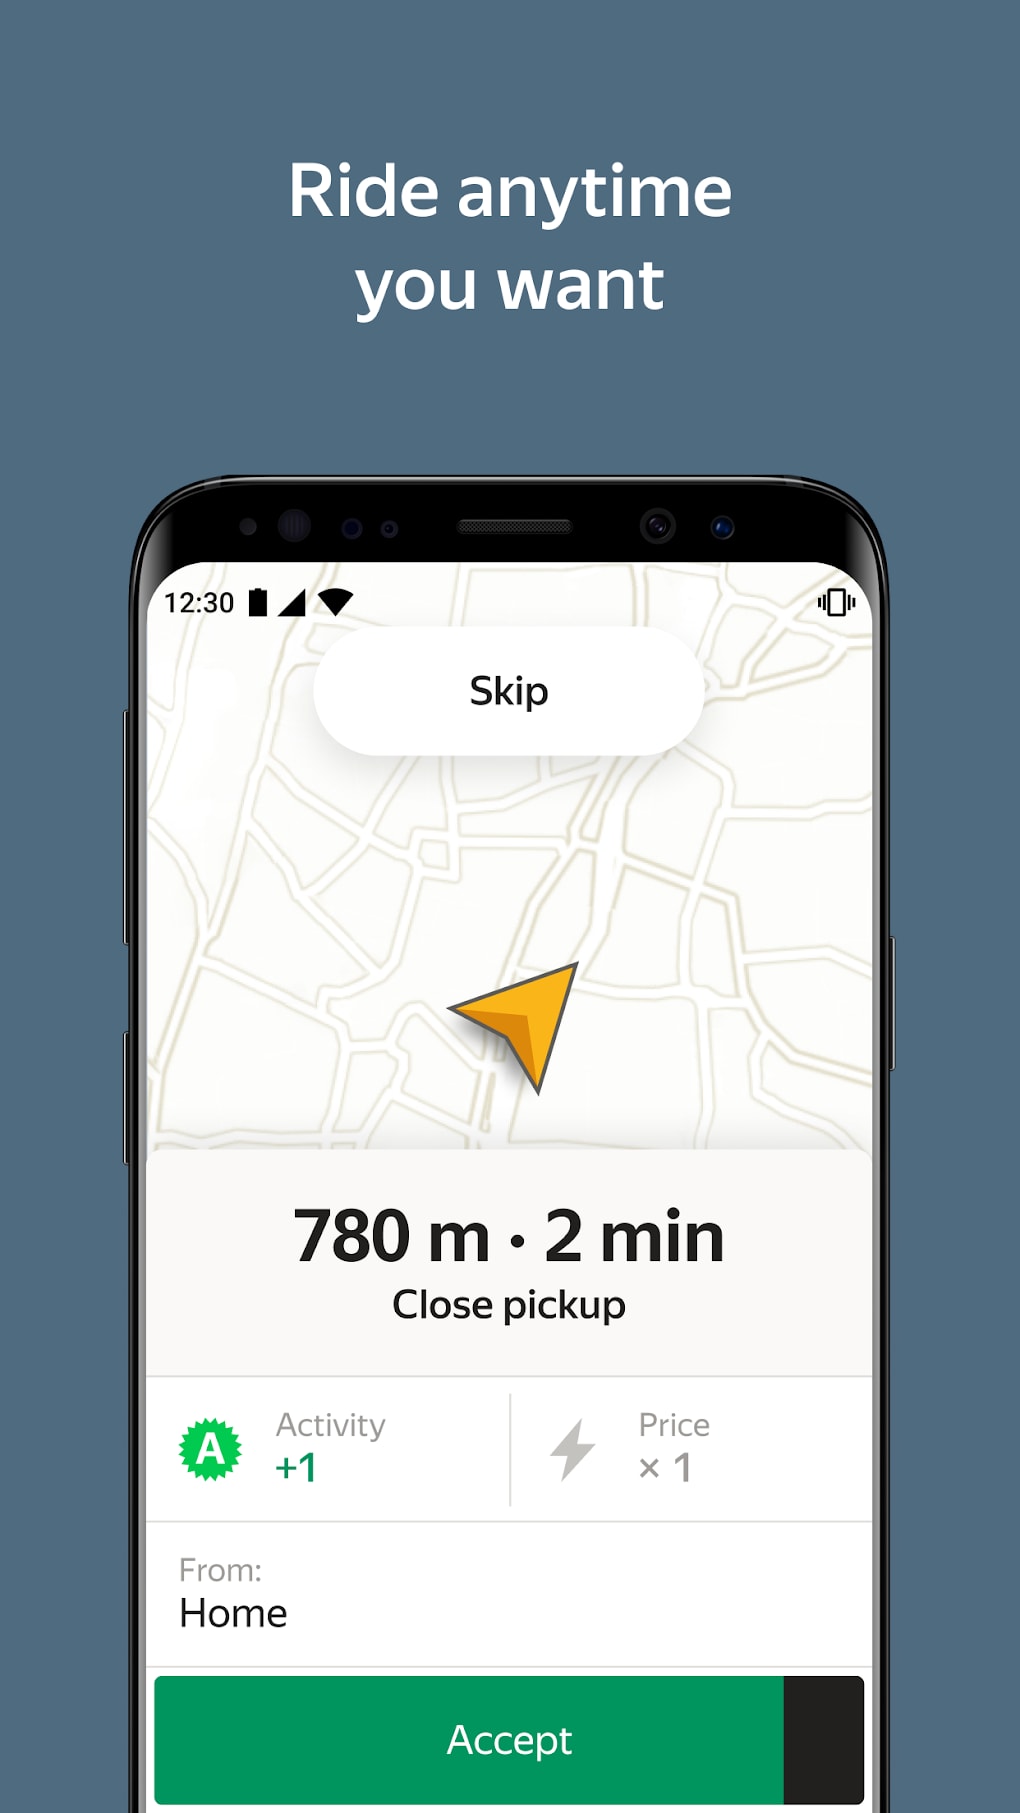 Yango Lite: light taxi app for Android - Download